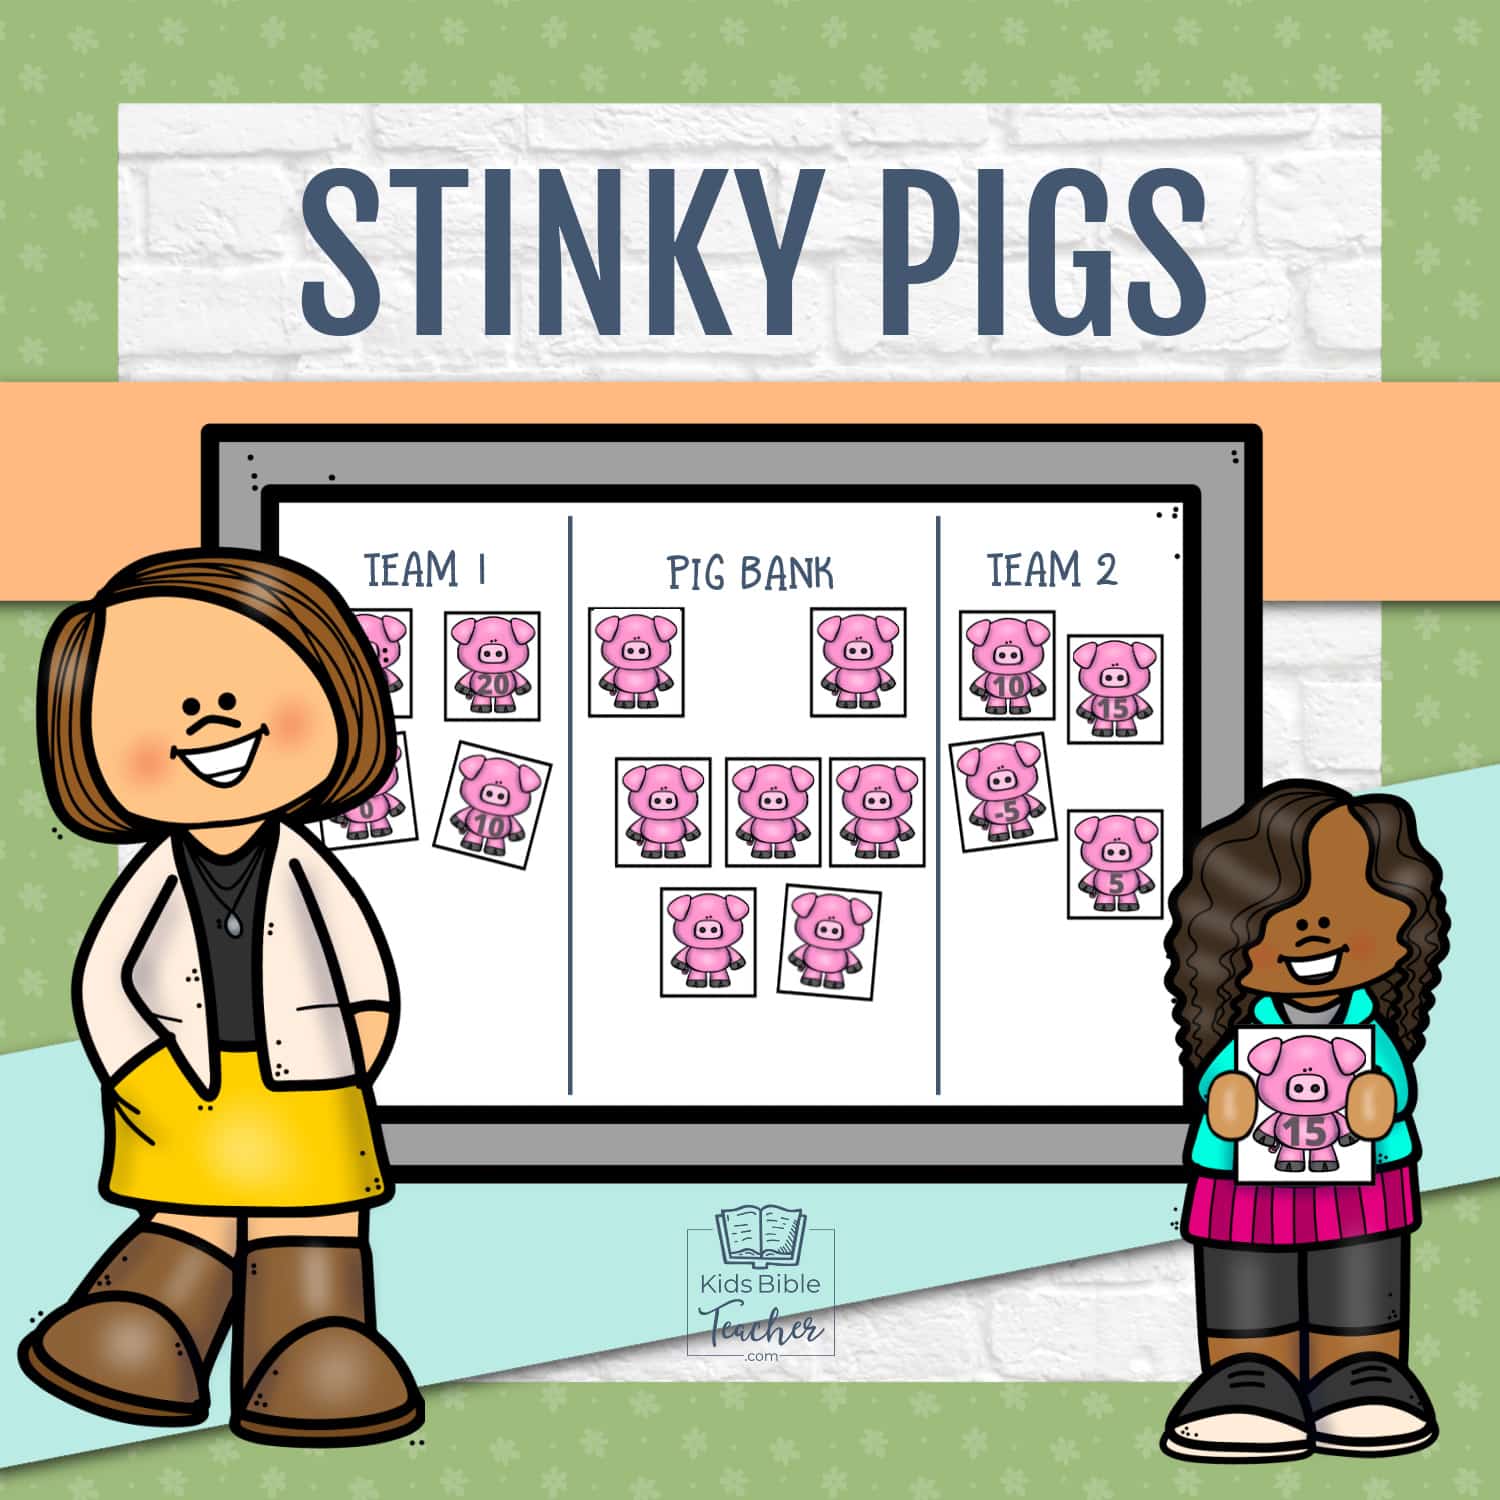 Stinky Pigs Bible Lesson Review Game for Sunday School Image showing pigs on dry erase board with teacher and student